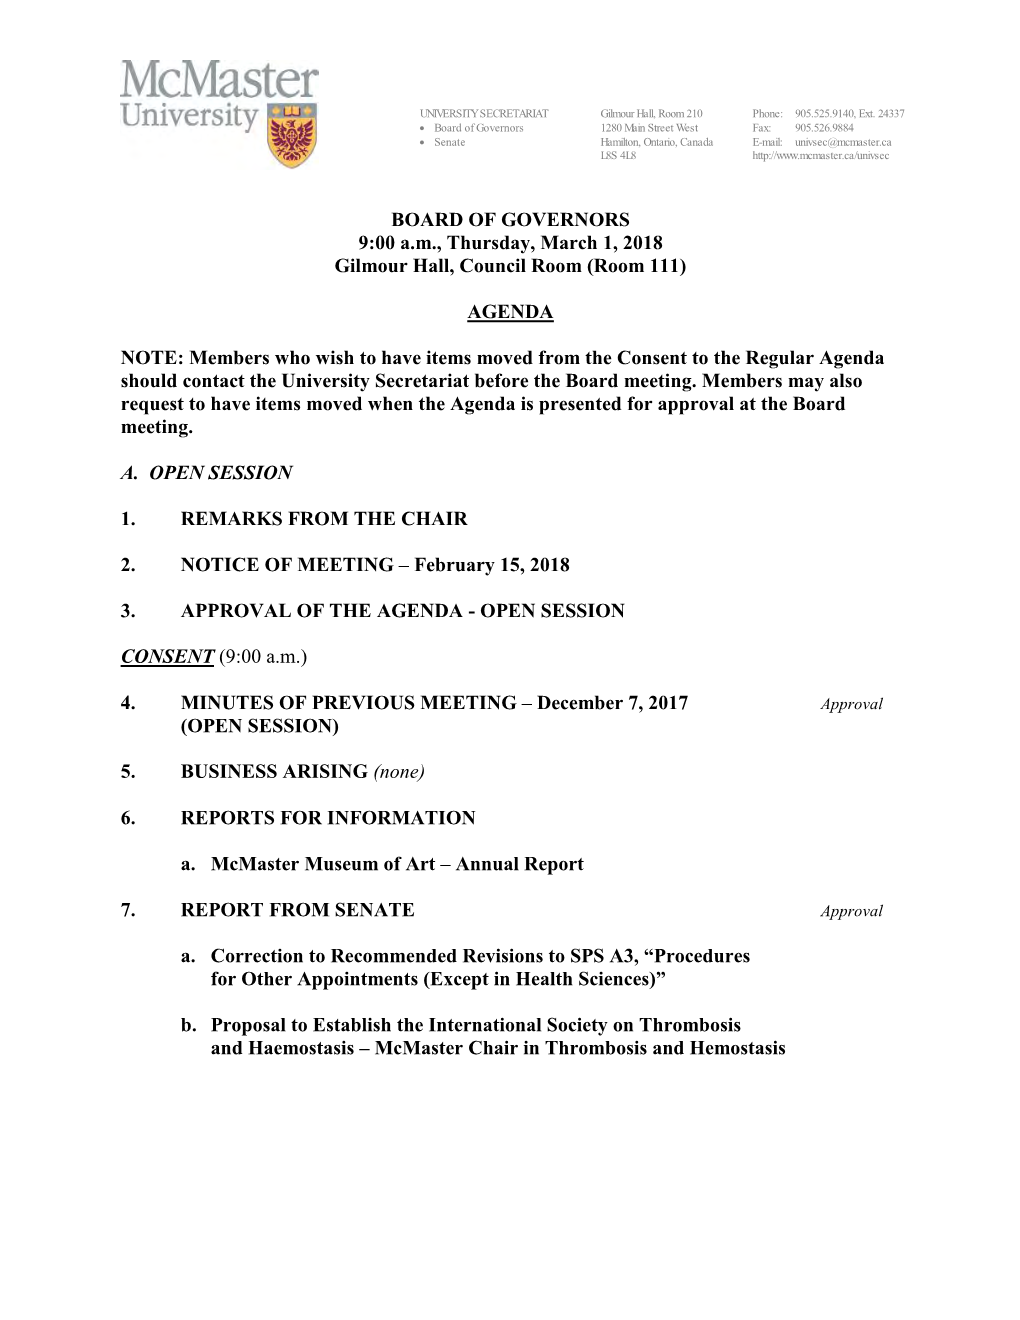 BOARD of GOVERNORS 9:00 Am, Thursday